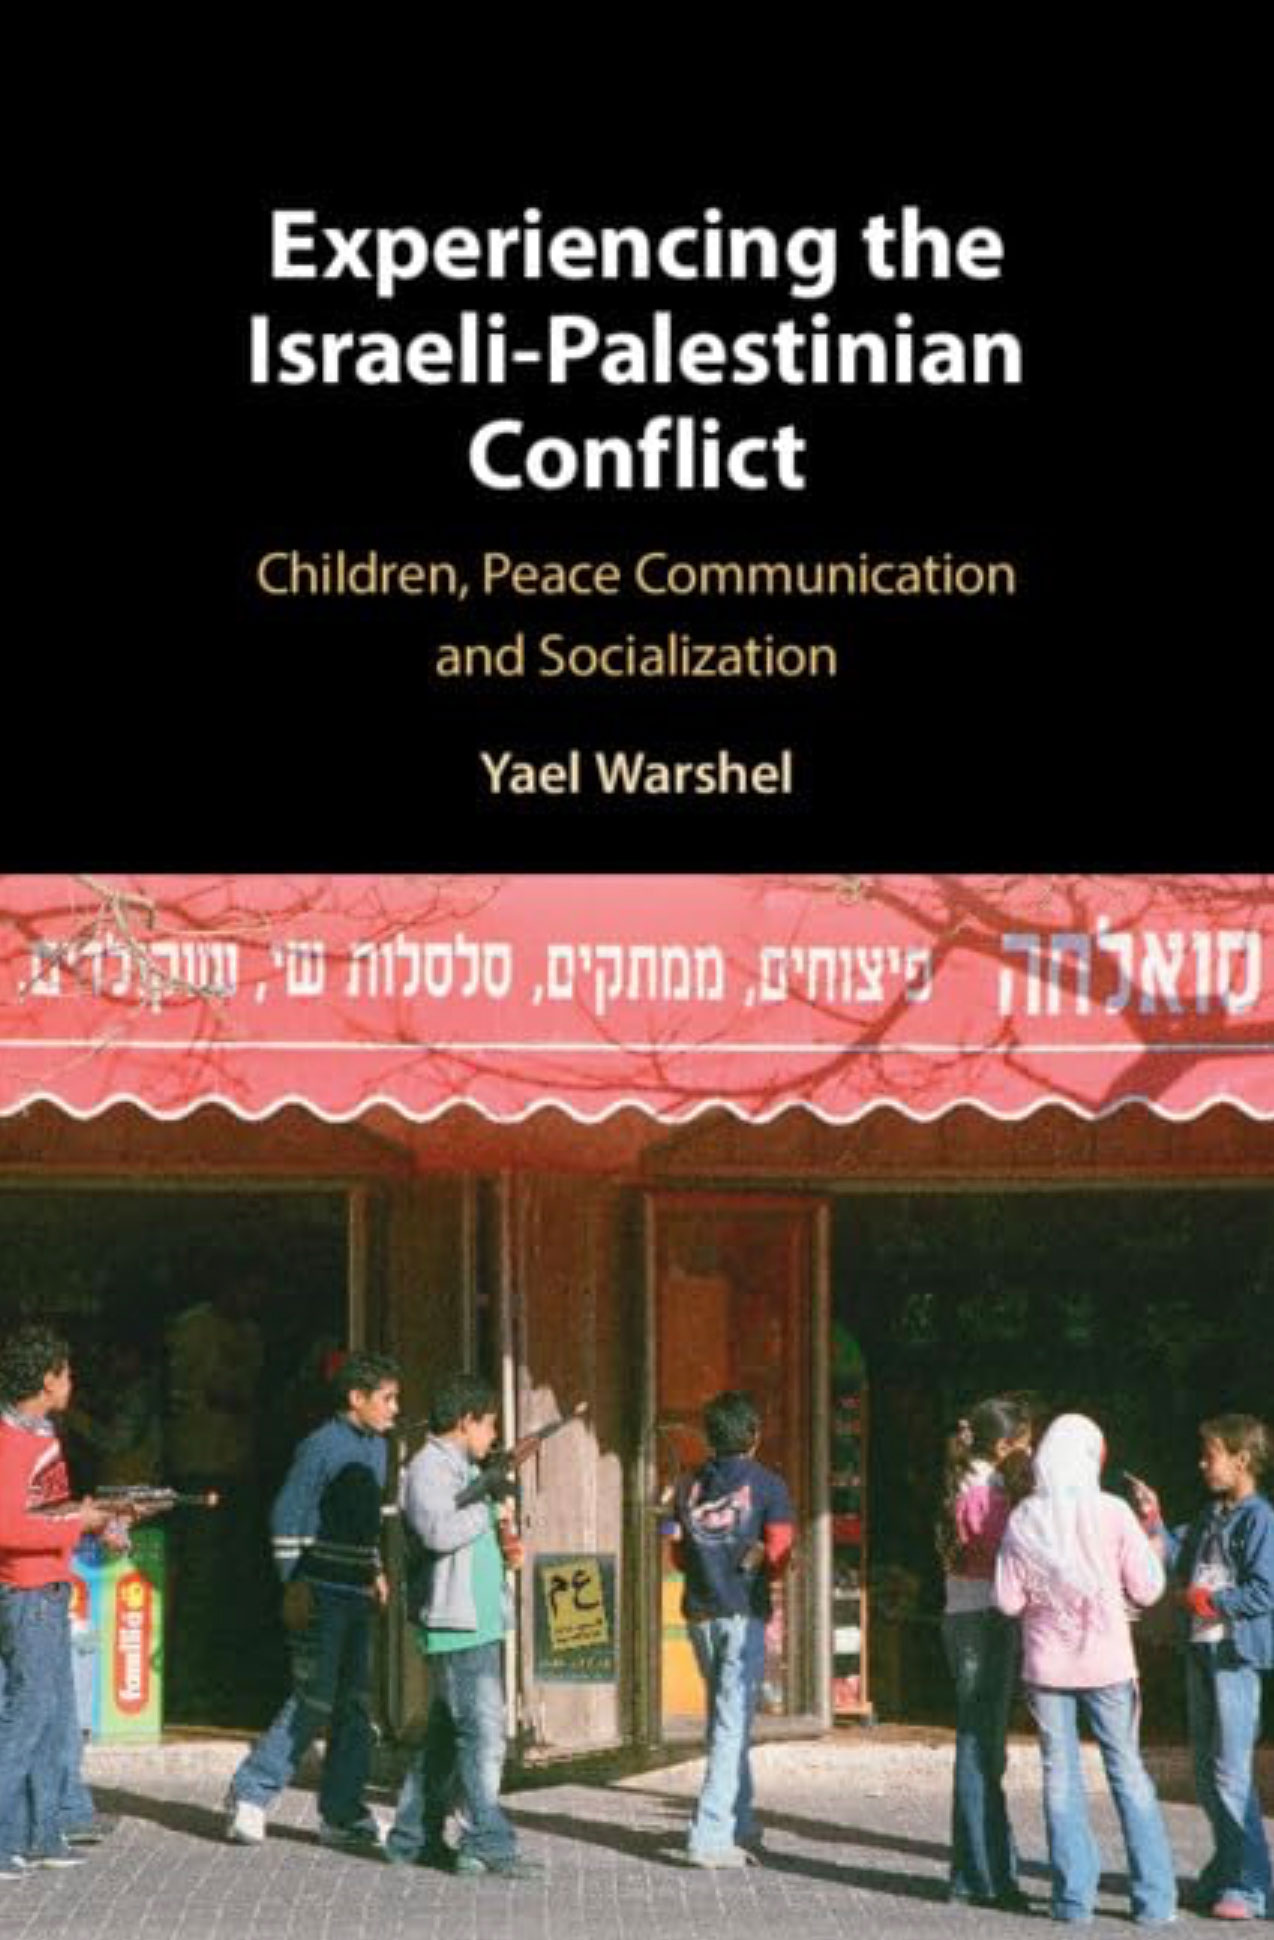 cover of Warshel's book courtesy